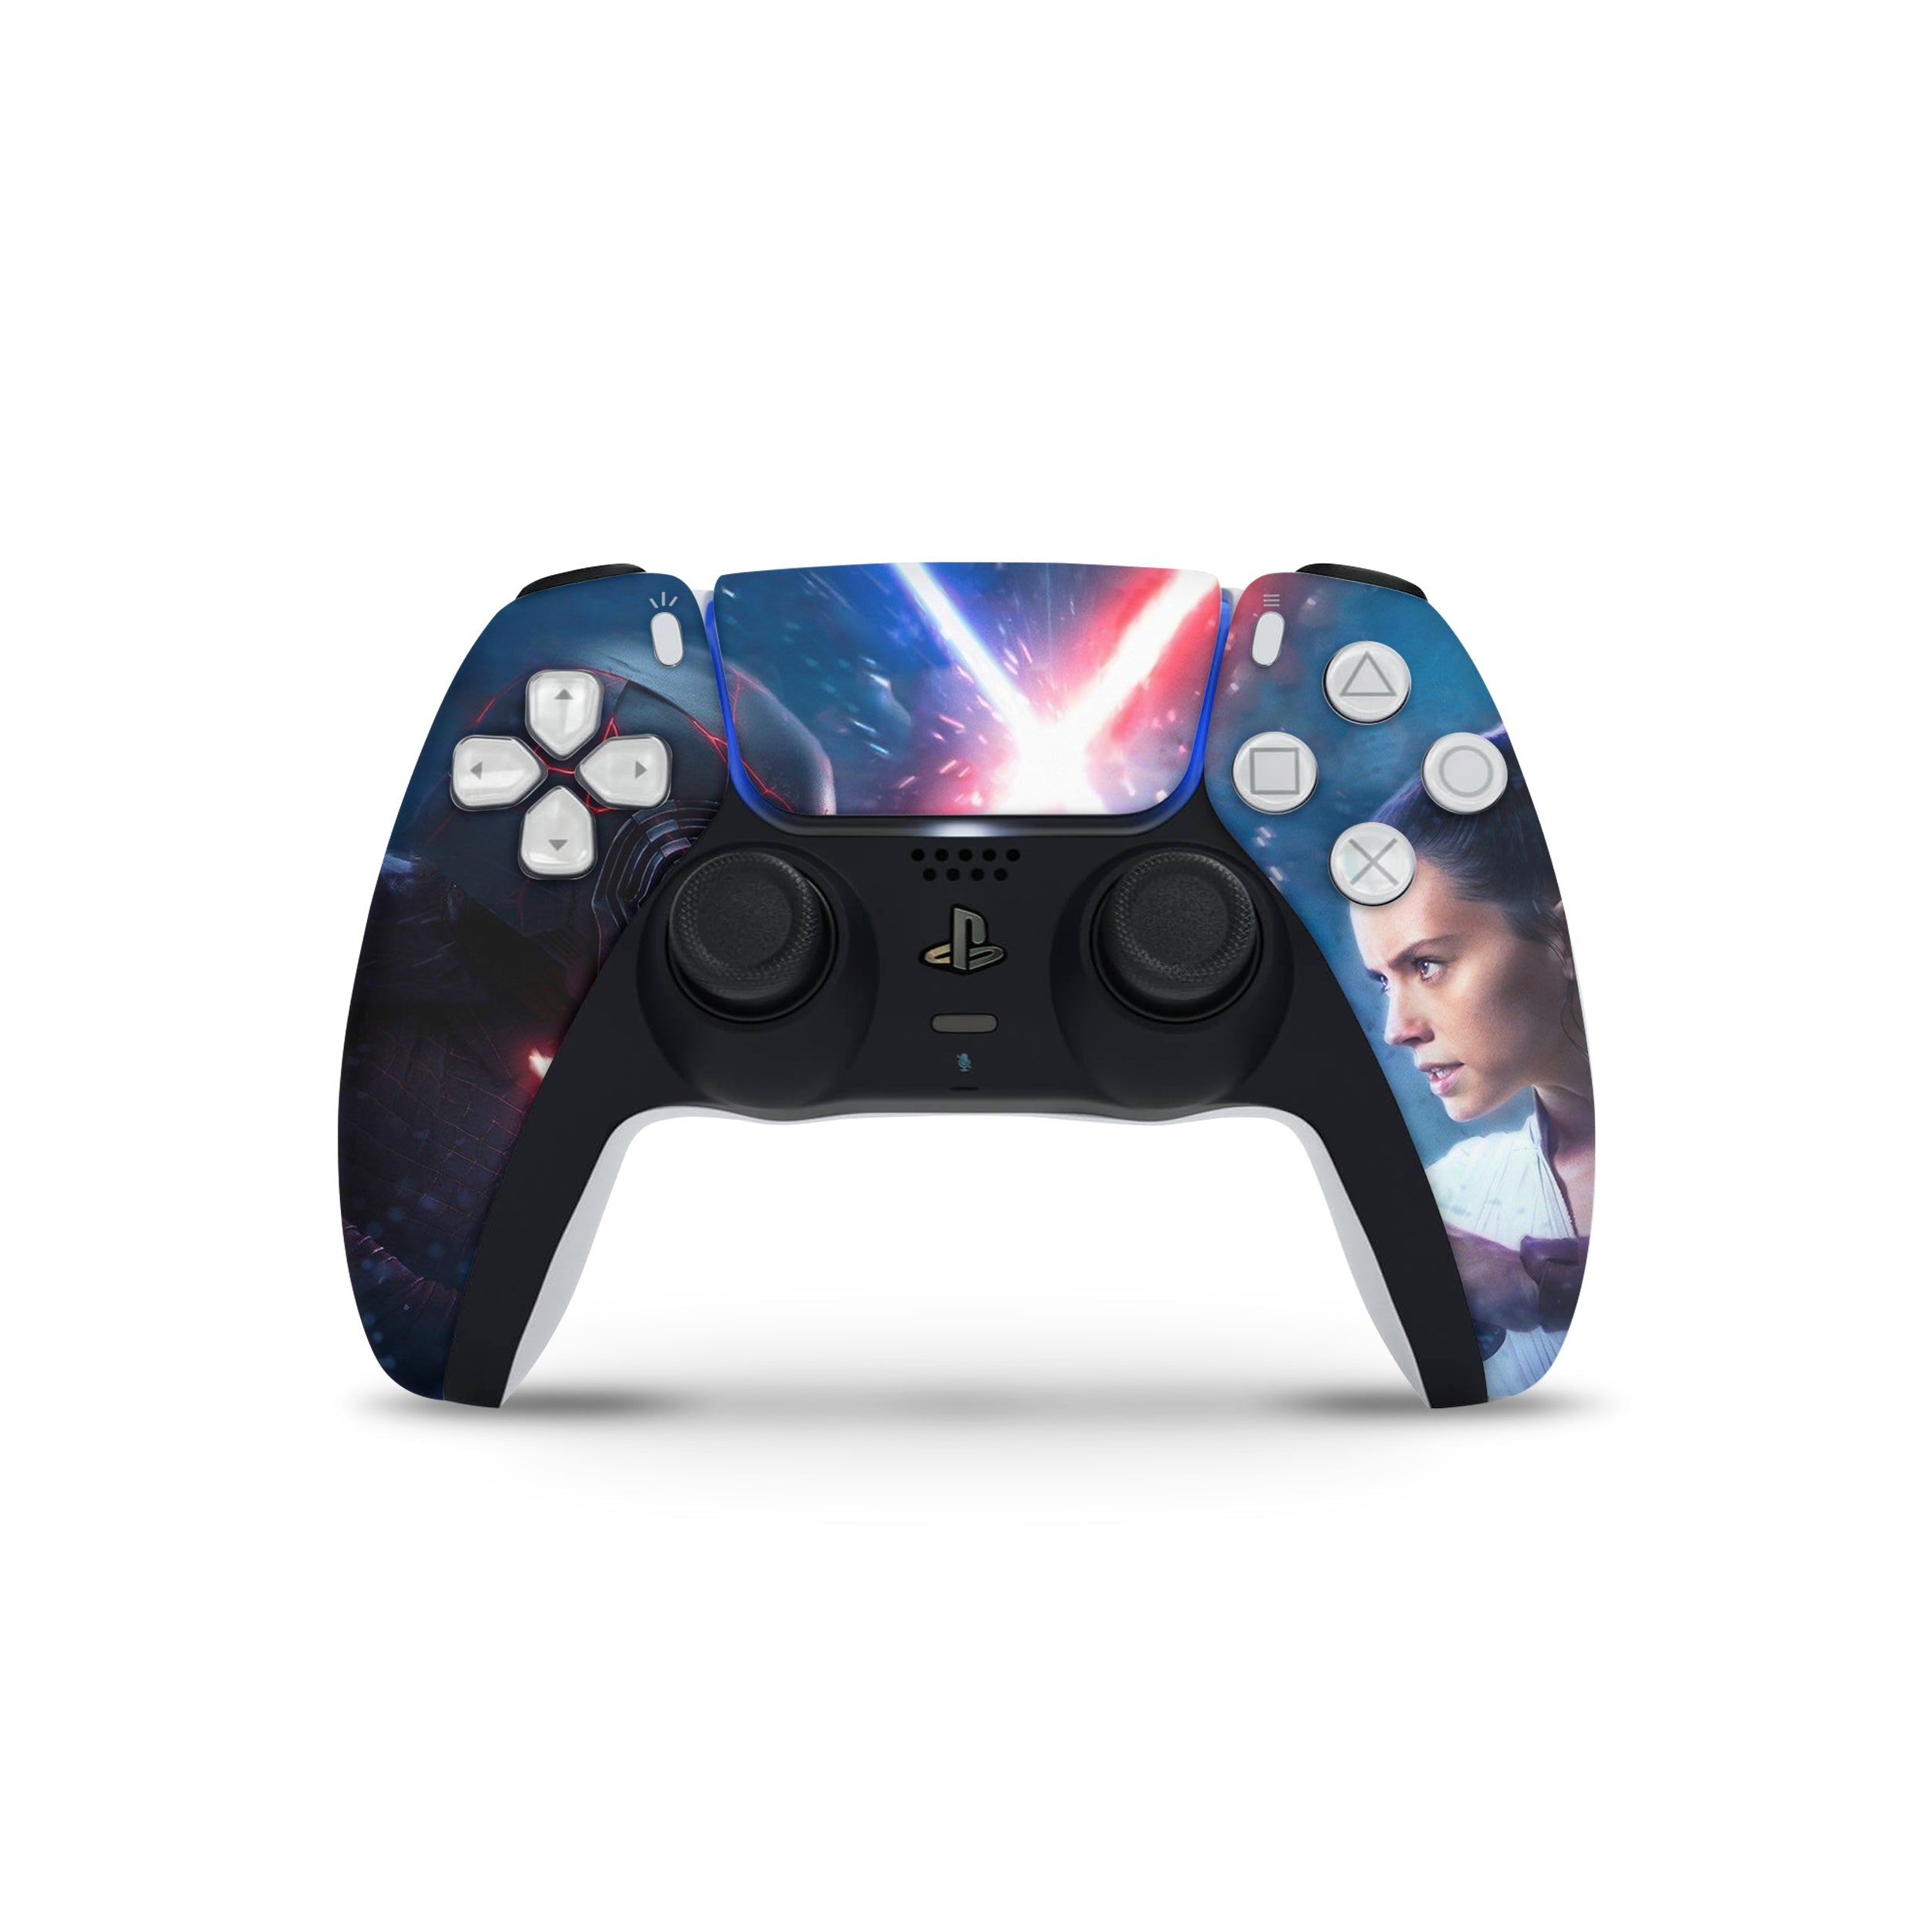 A video game skin featuring a Star Wars Rey Kylo Ren design for the PS5 DualSense Controller.